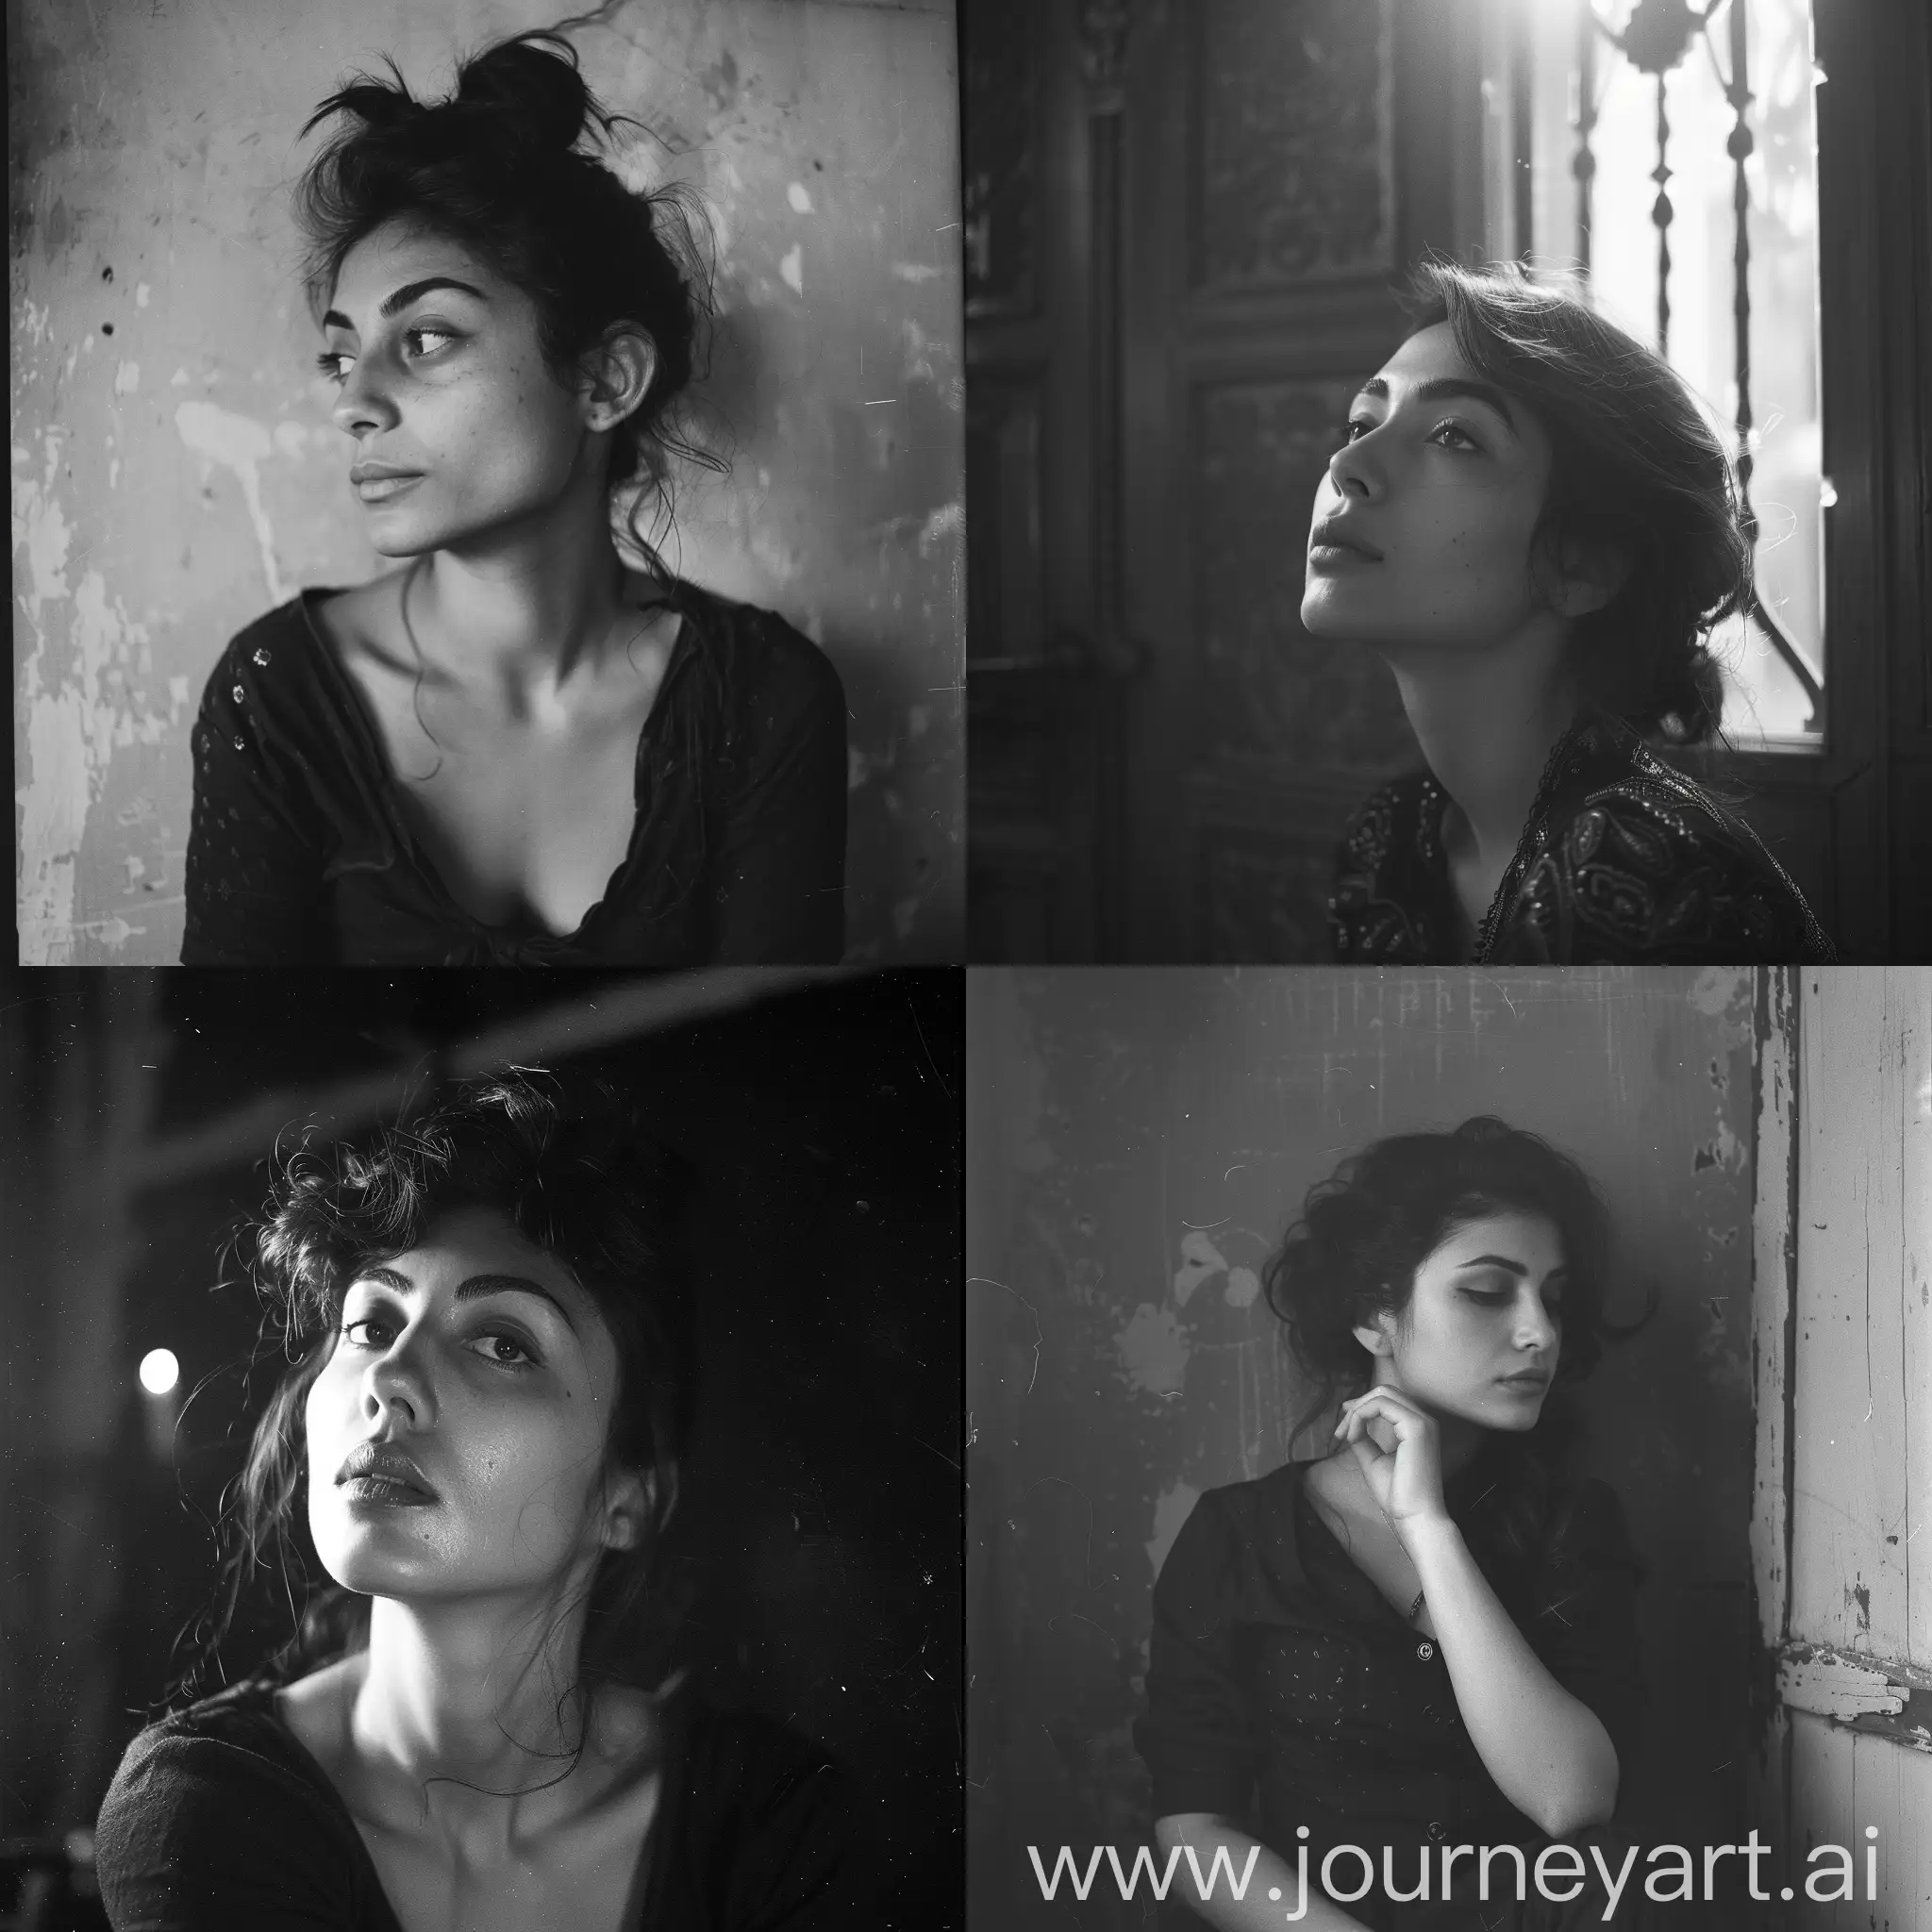 A woman who's Georgian and Armenian and French, woman, photography taken with flash: analog photography: grain film, vintage photo, in the style of lo-fi aesthetics